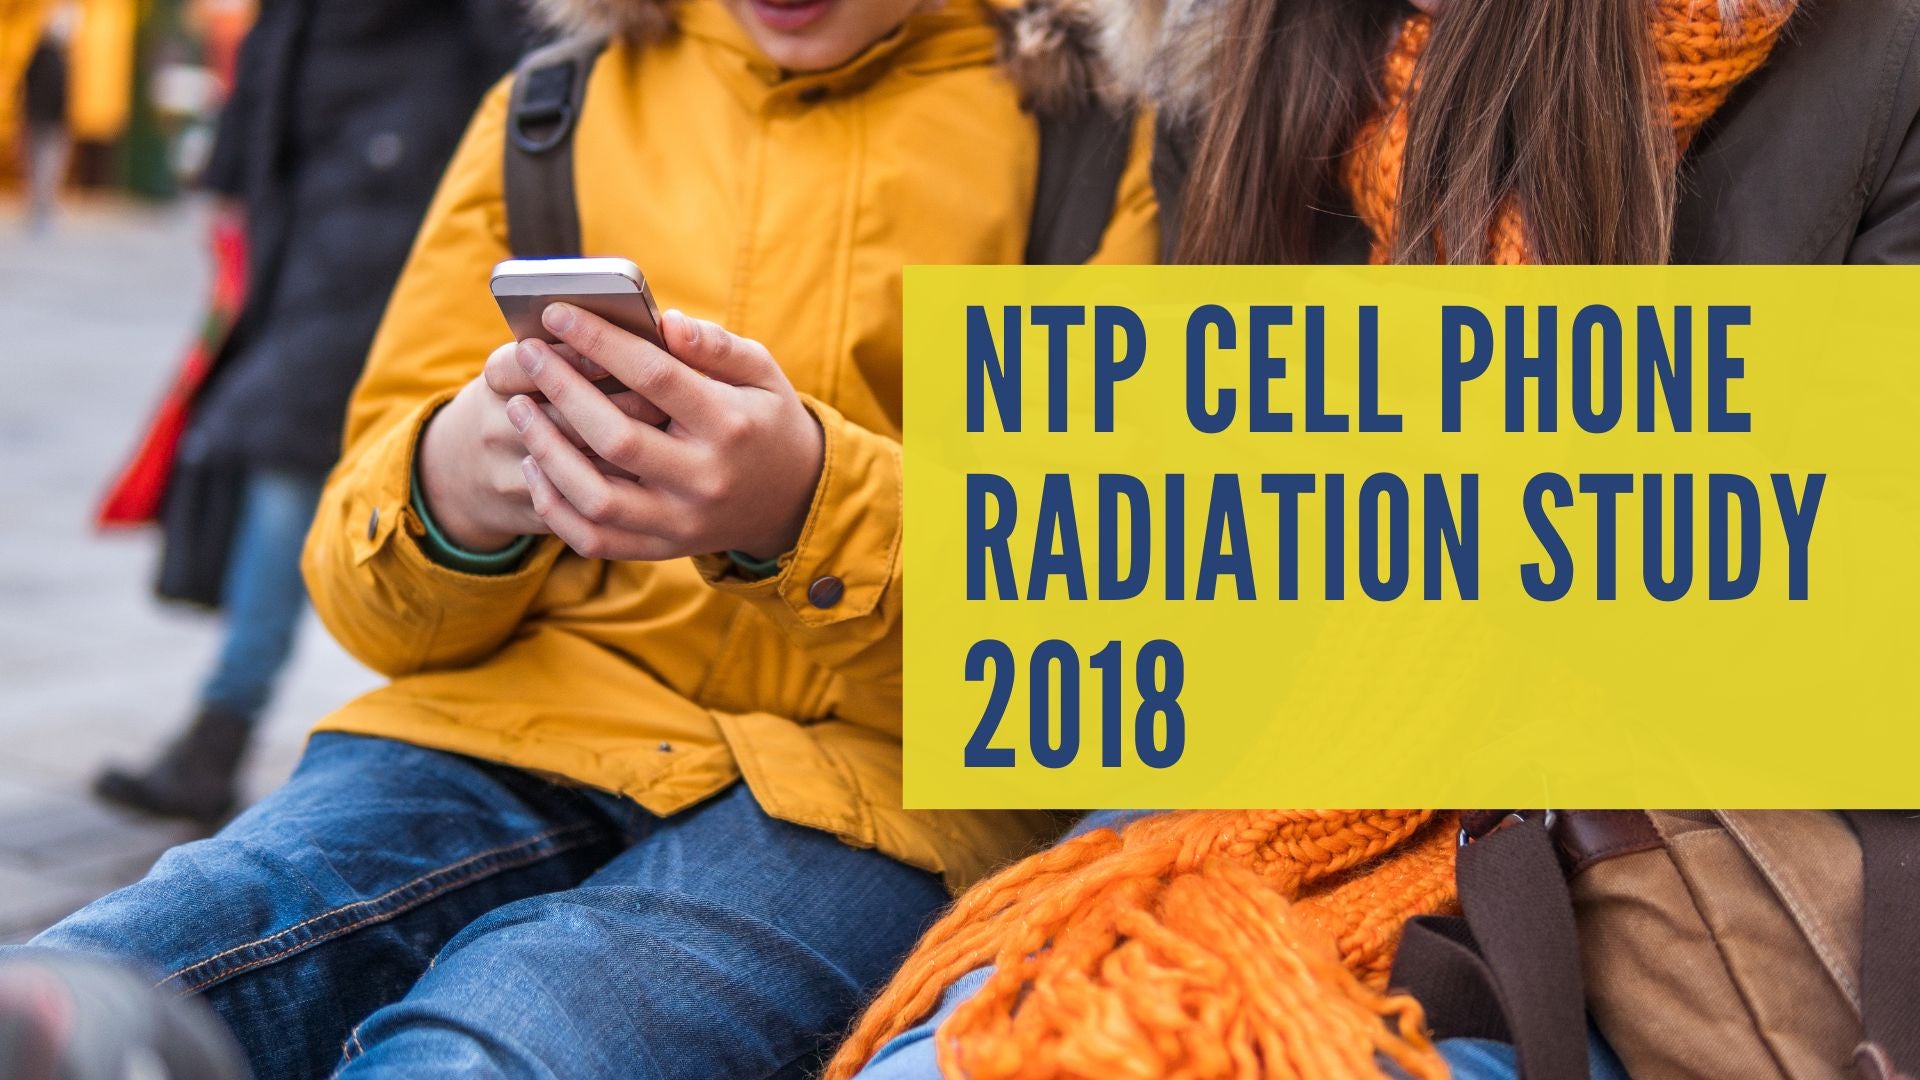 NTP Cell Phone Radiation Study 2018